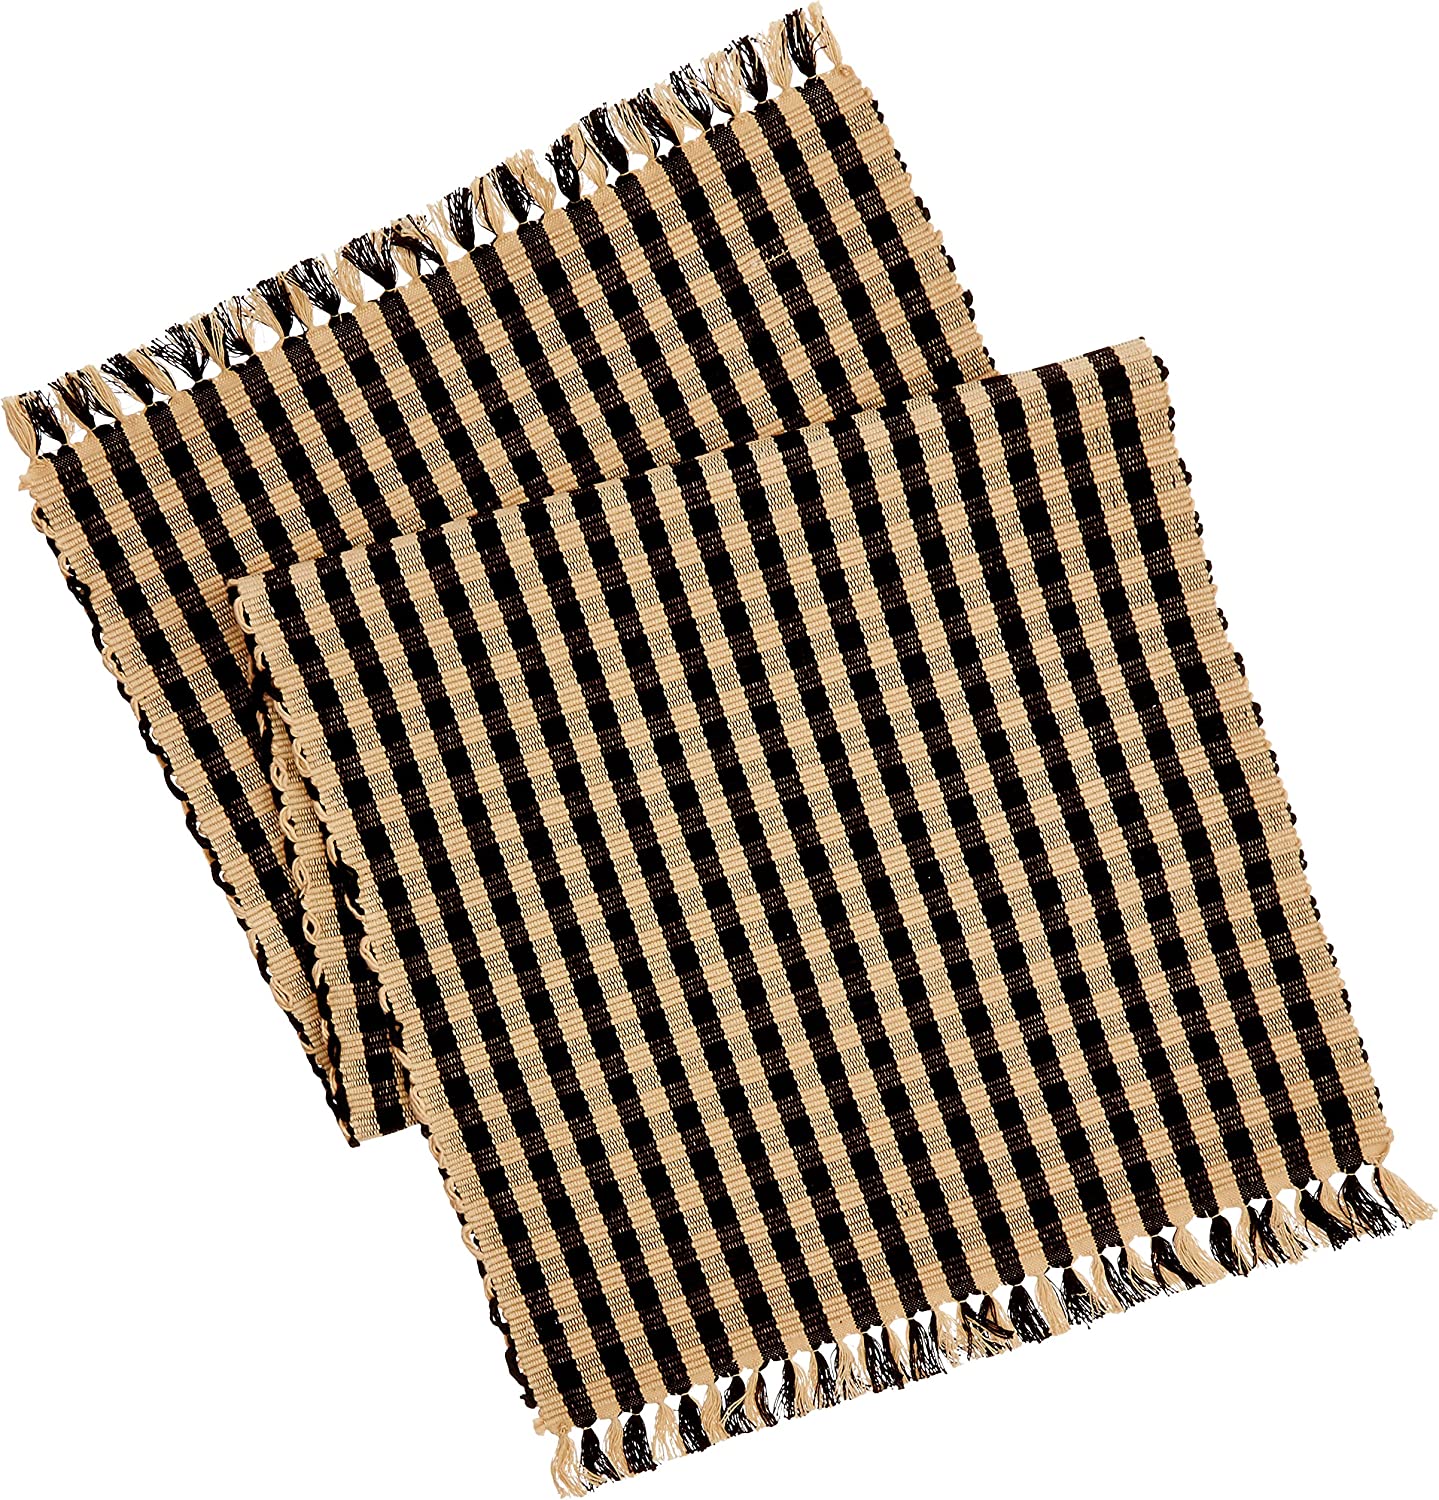 Home Collection by Raghu, Black/Nutmeg Heritage House Check Table Runner, 14 by 36-Inch (TR100011)